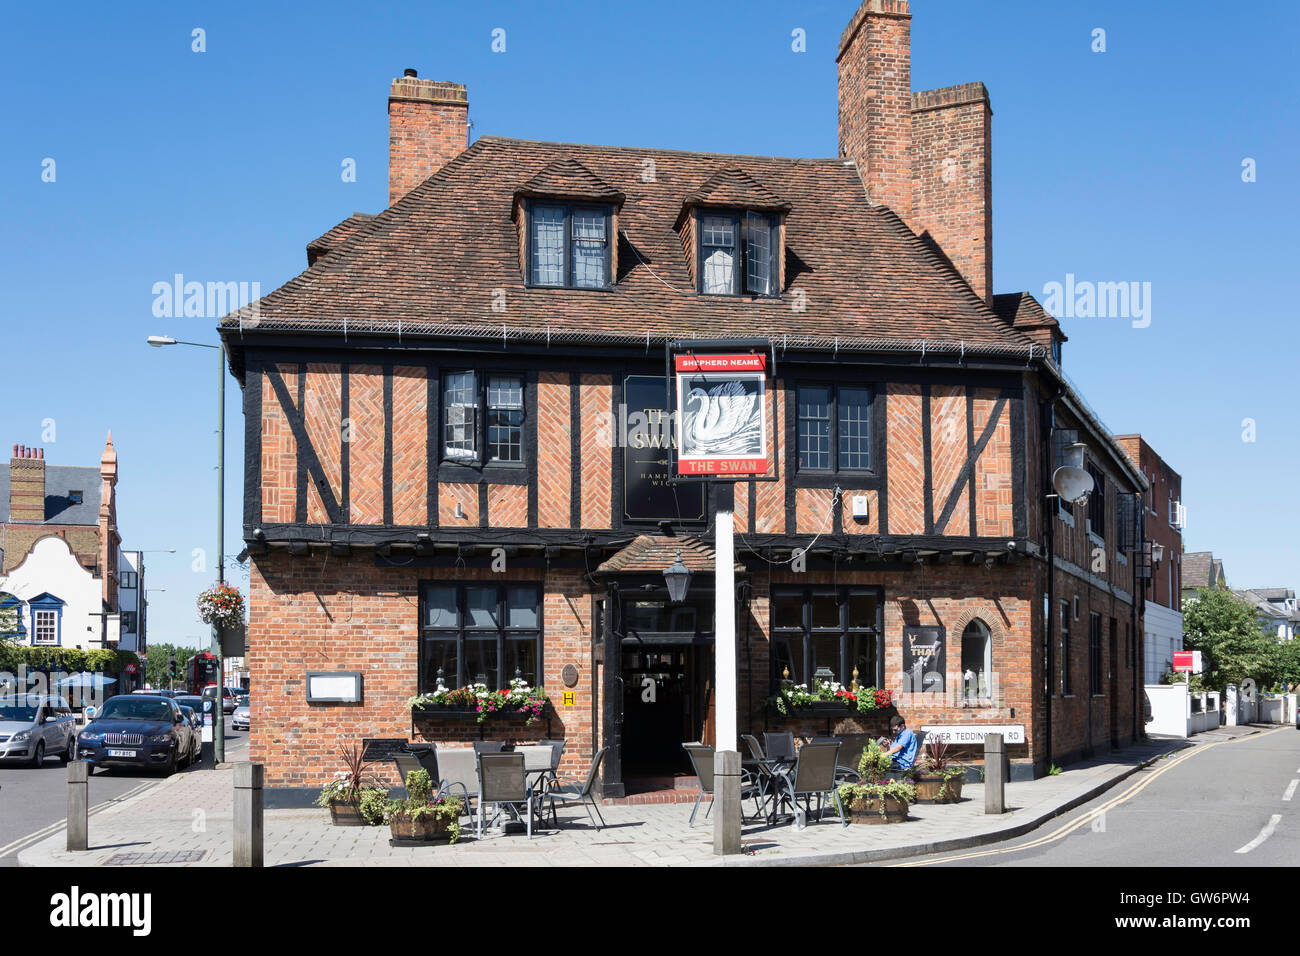 The Swan Pub on High Street, Hampton Wick, Royal Borough of Richmond upon Thames, Greater London, Angleterre, Royaume-Uni Banque D'Images